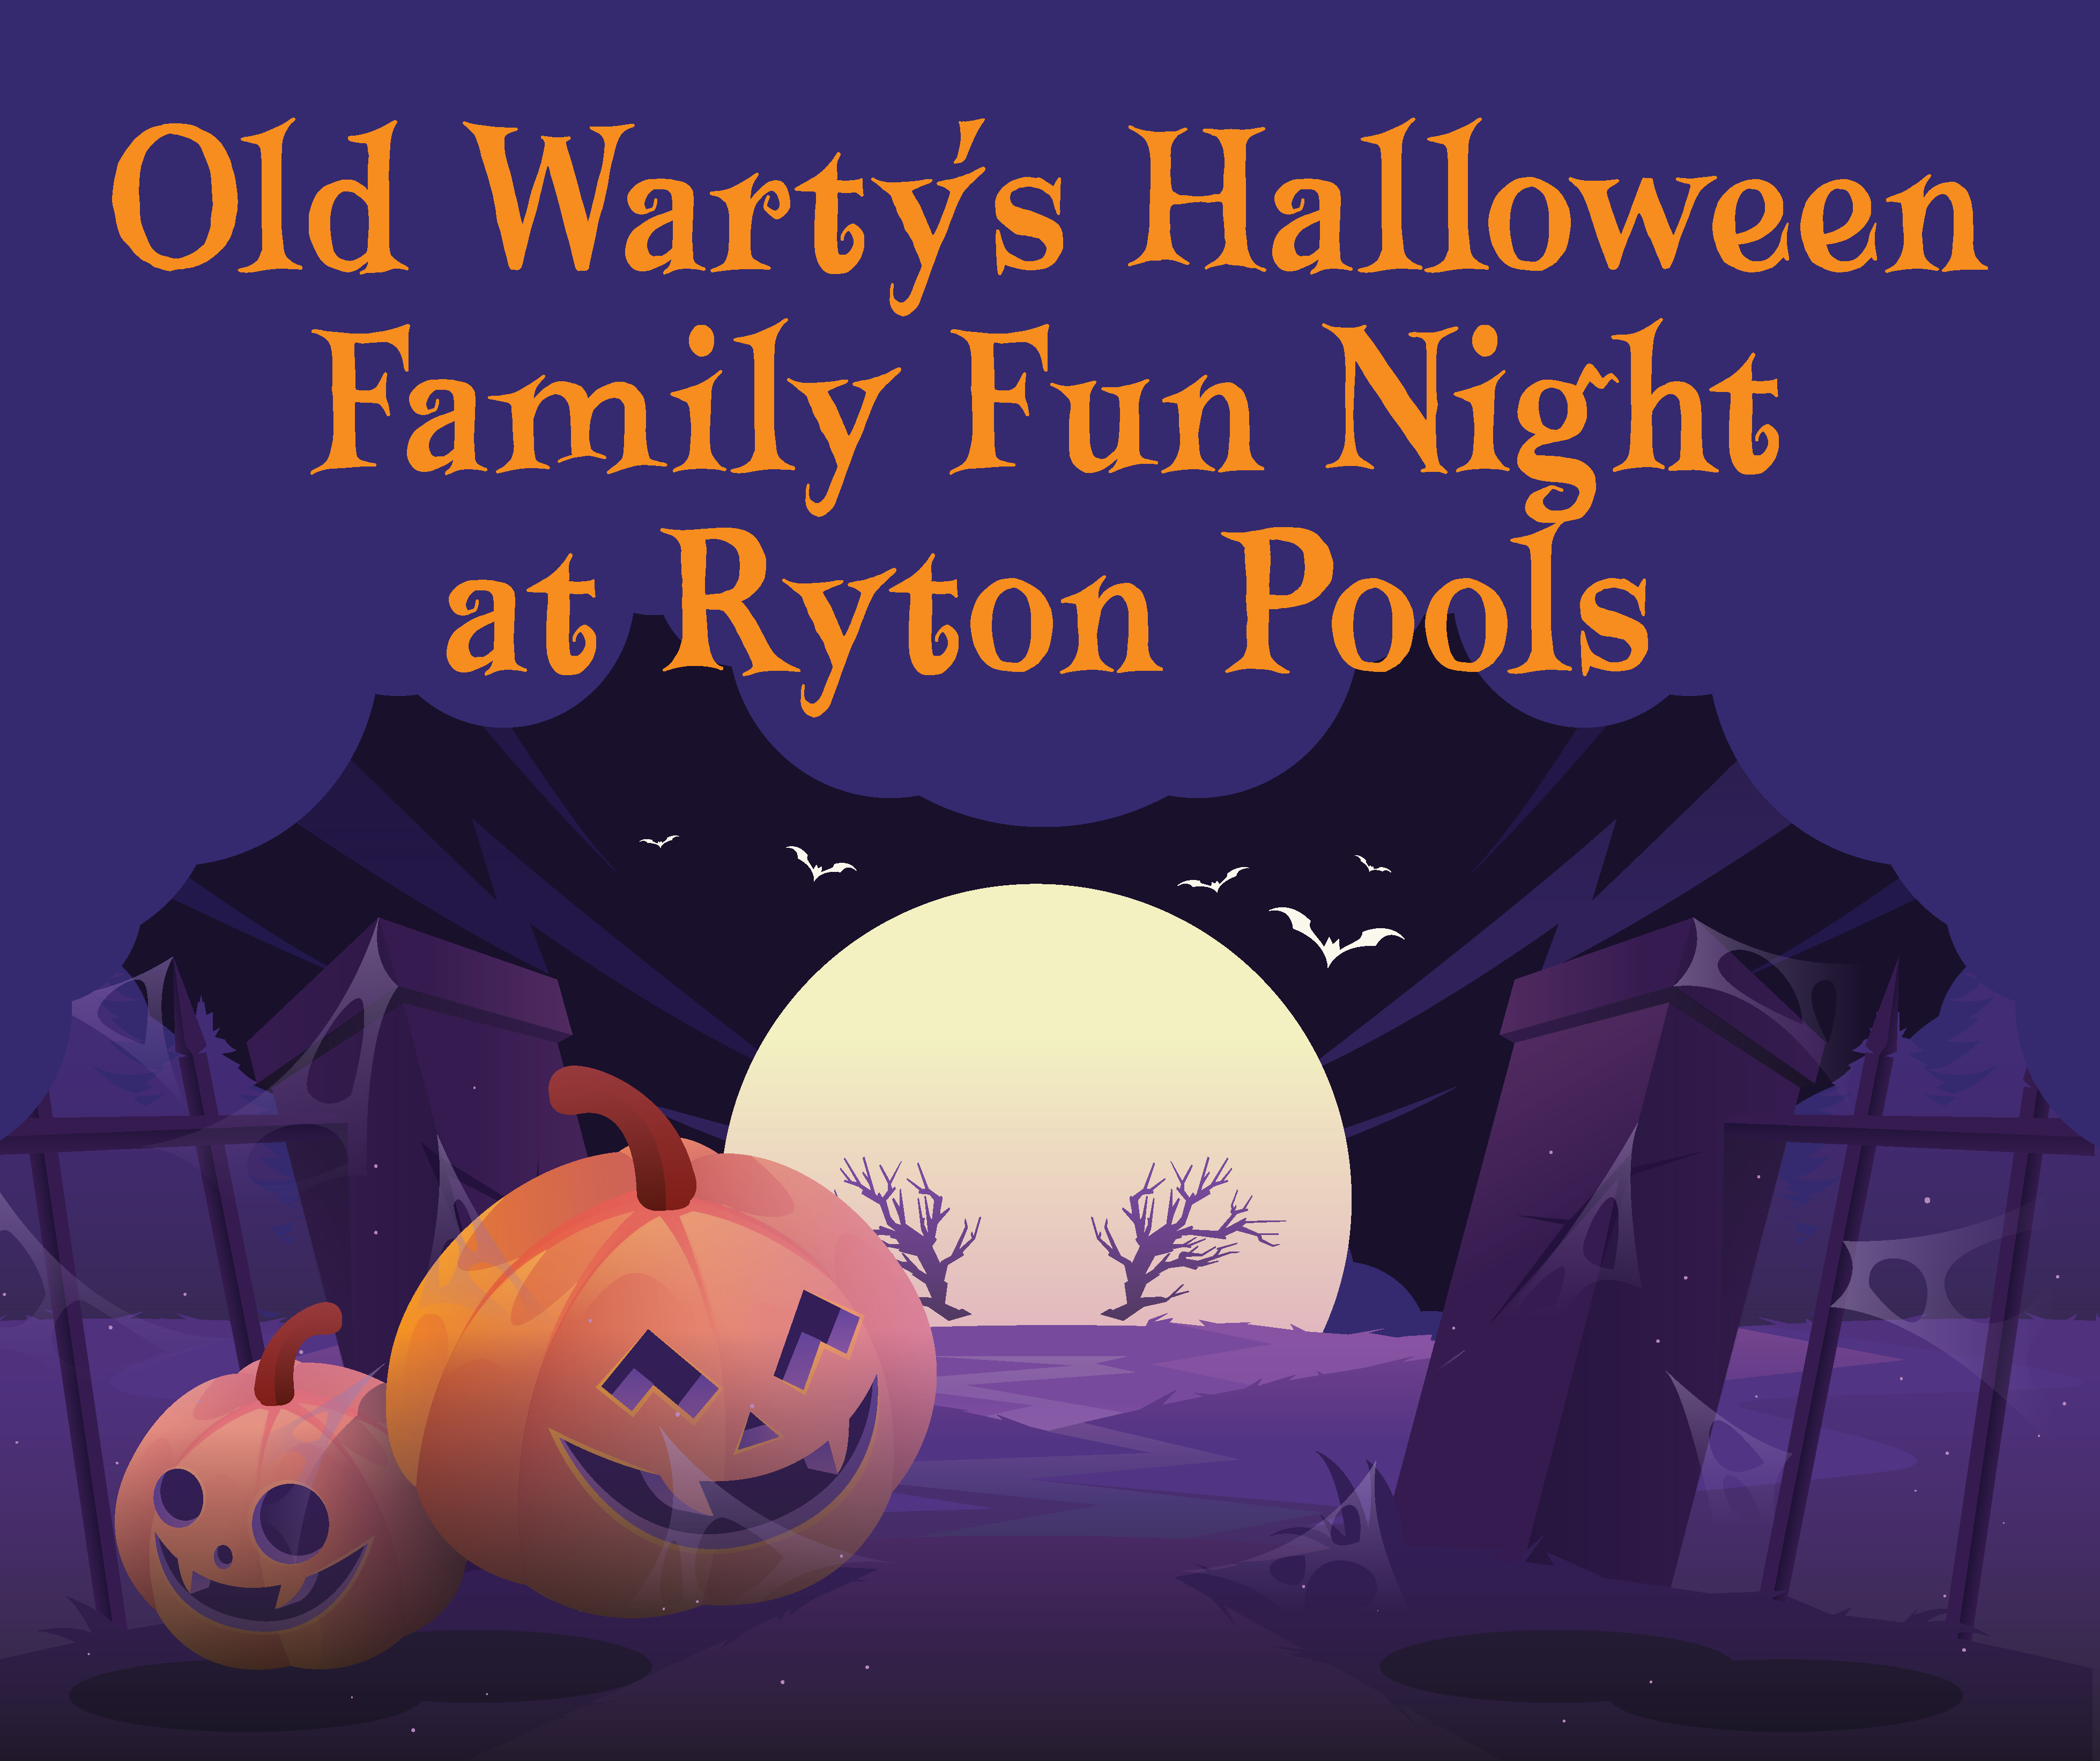 Graphic showing a pumpkin in front of a full moon, with the text "Old Warty's Halloween Family fun Night at Ryton Pools".